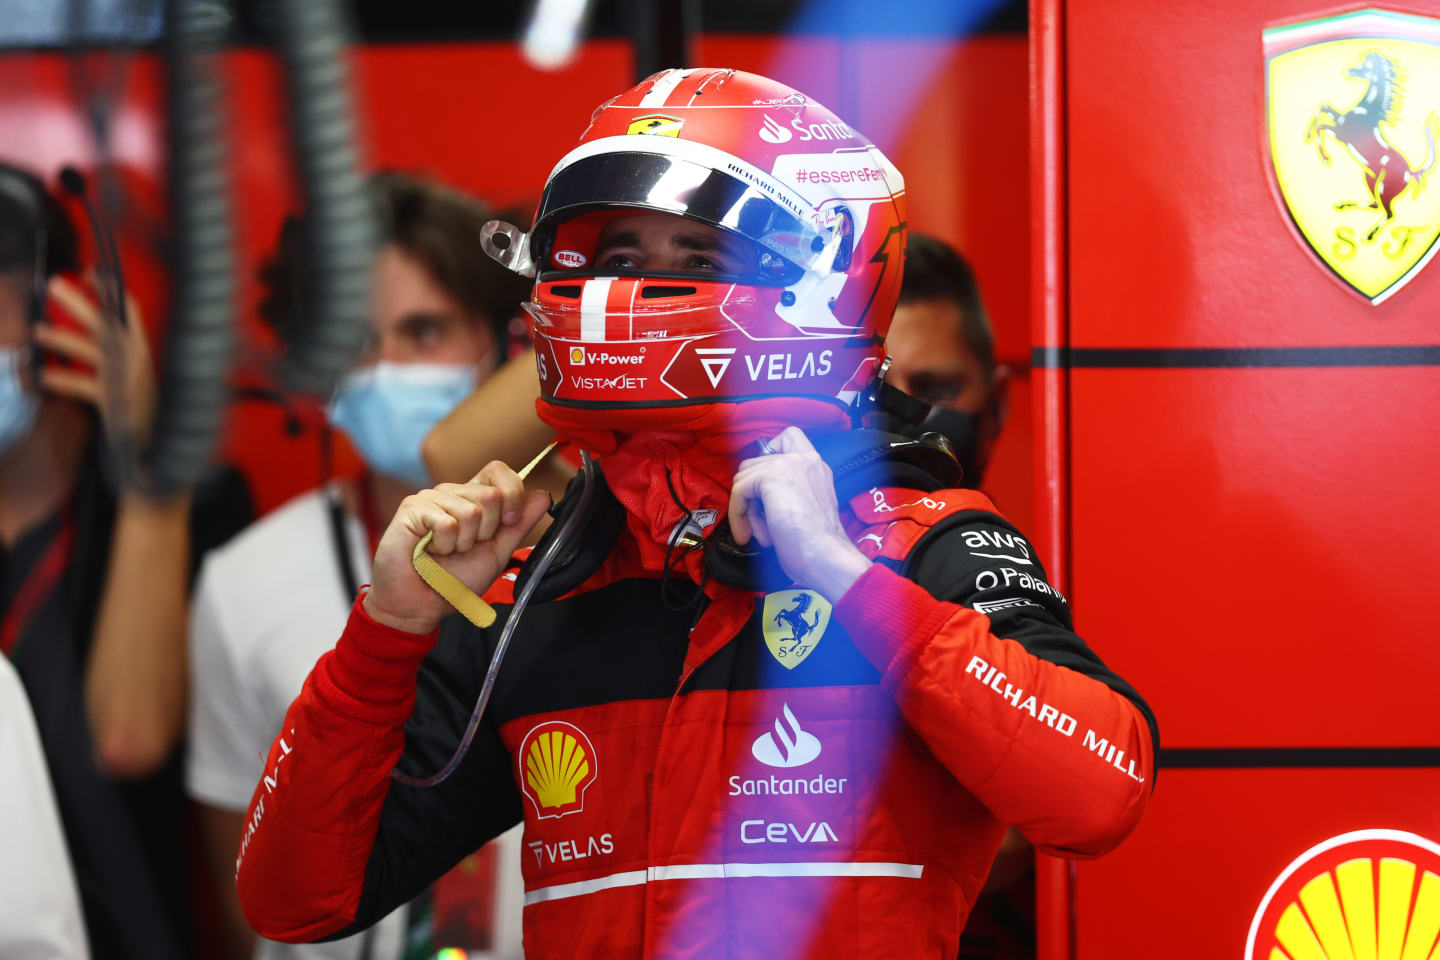 BARCELONA, SPAIN - MAY 20: Charles Leclerc of Monaco and Ferrari takes off his race helmet in the